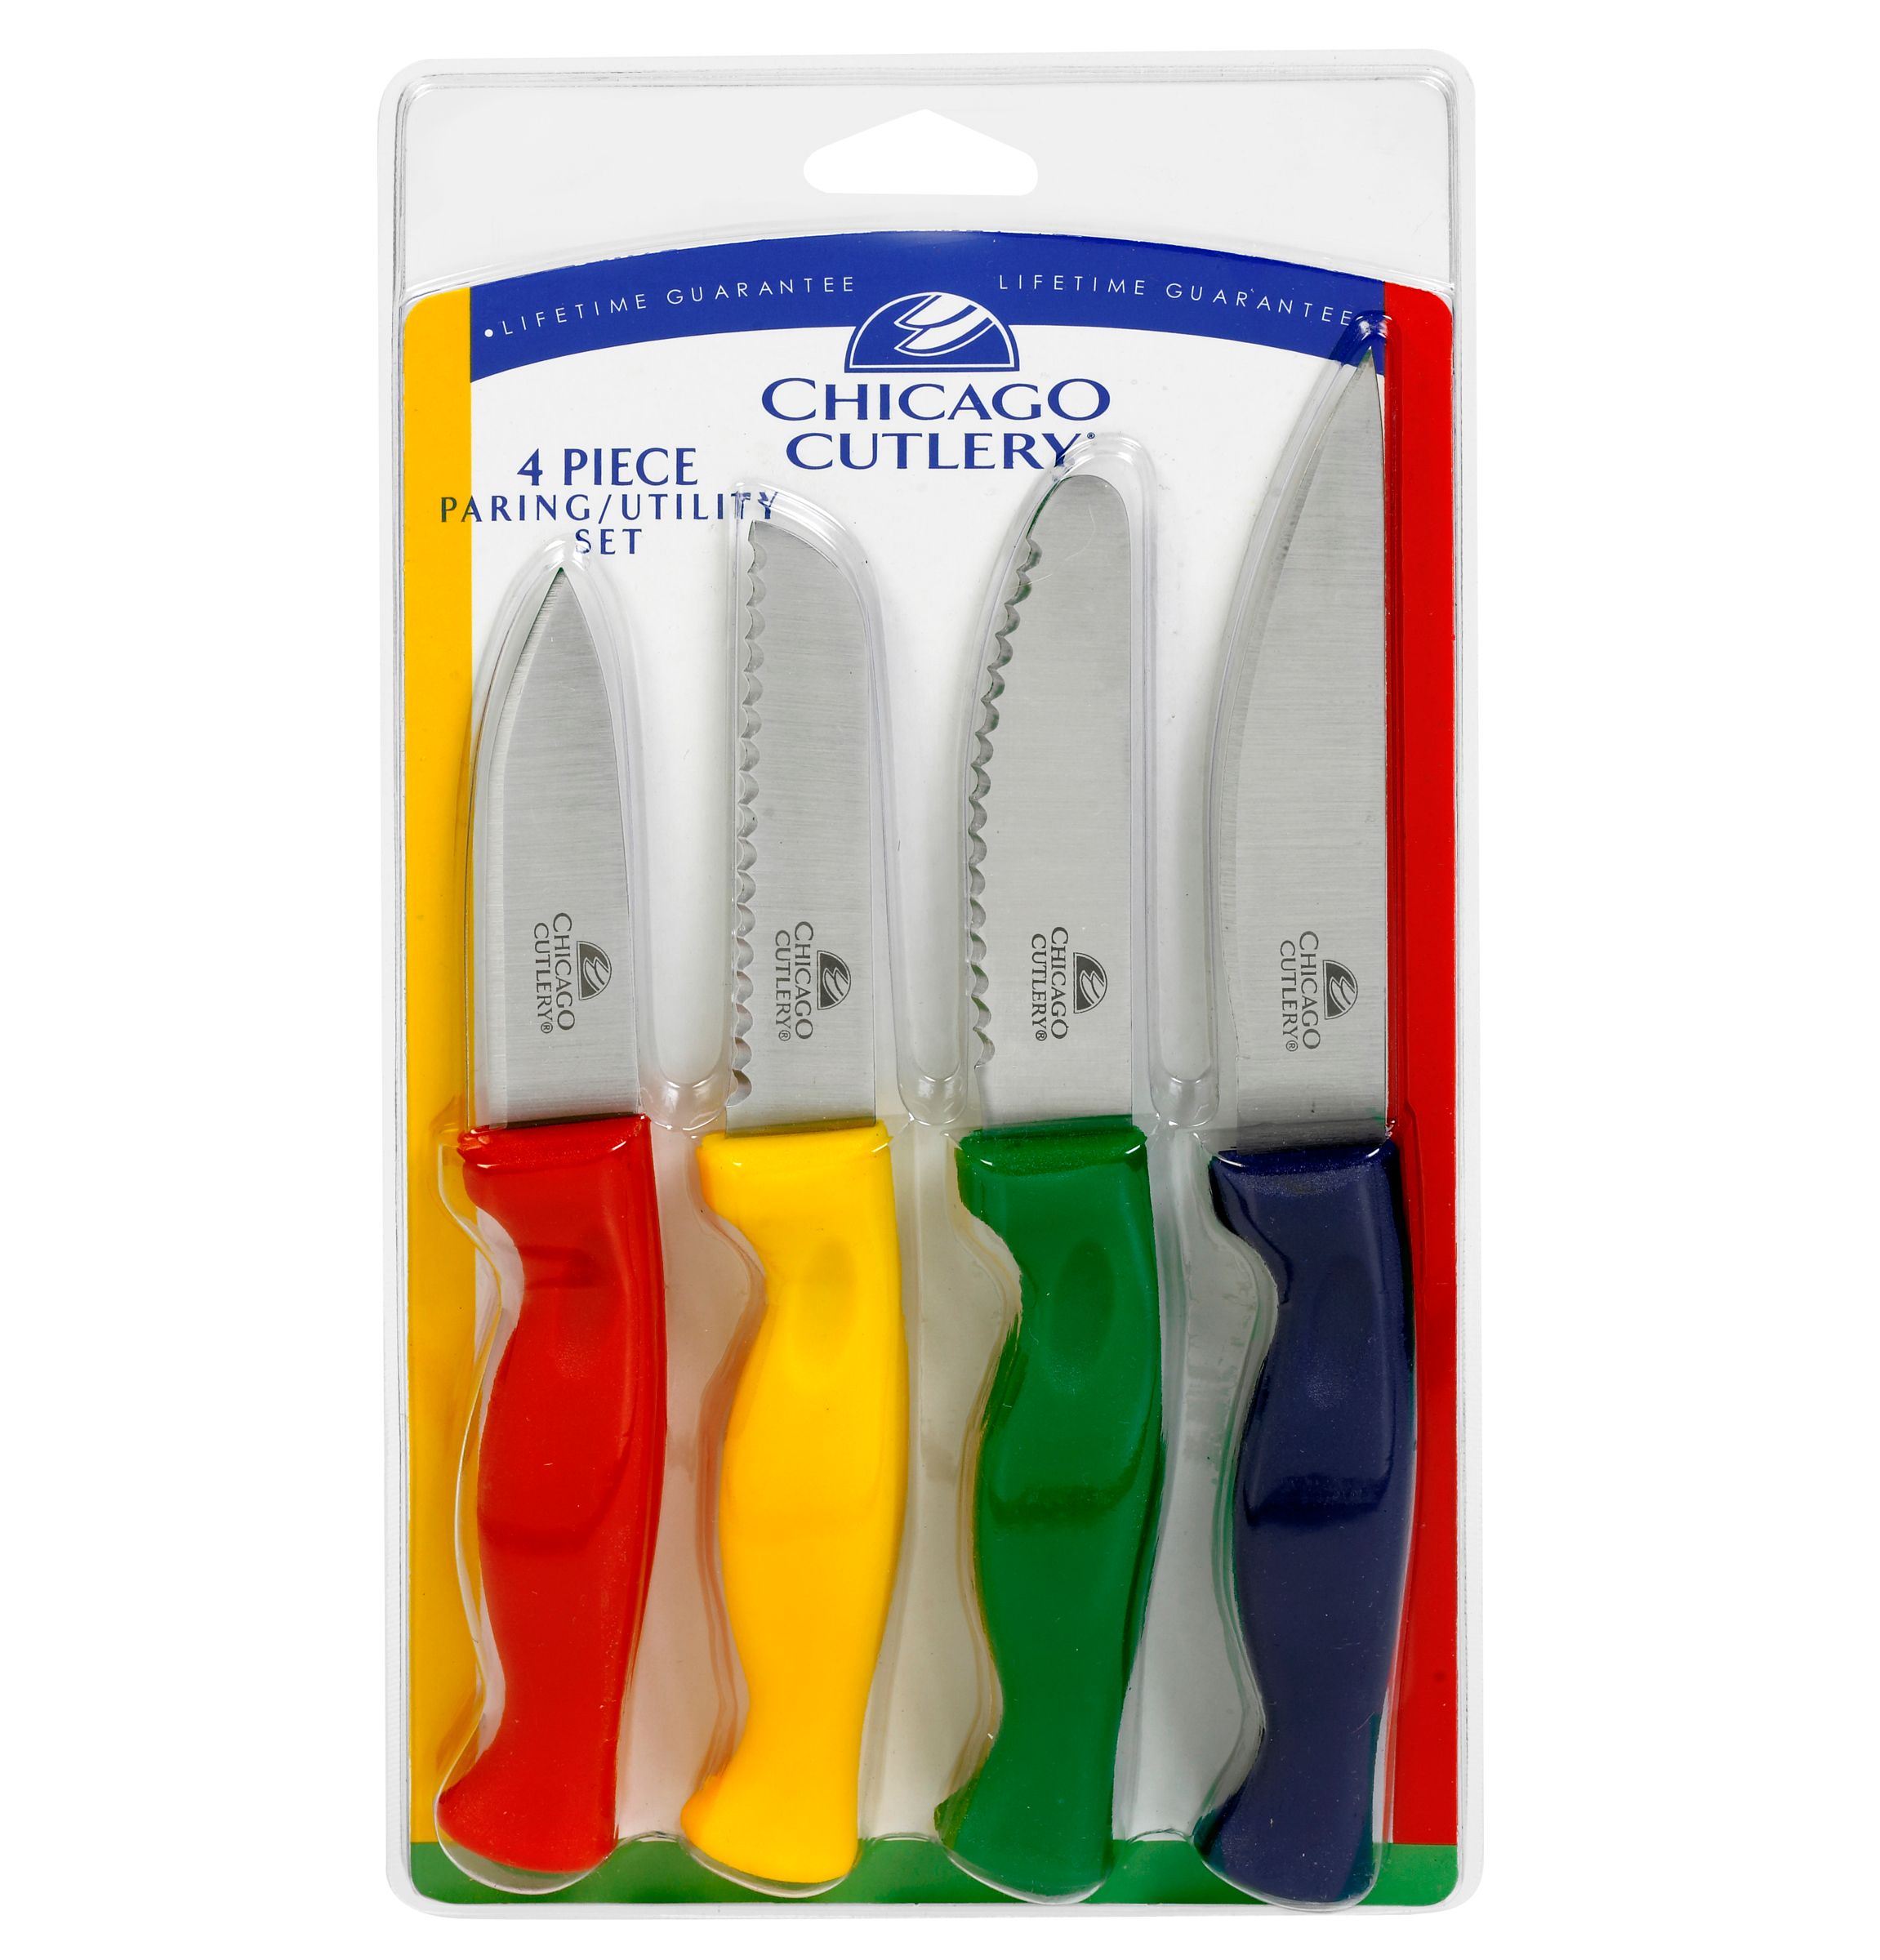 Chicago Cutlery 4 pc. Paring Knife Set